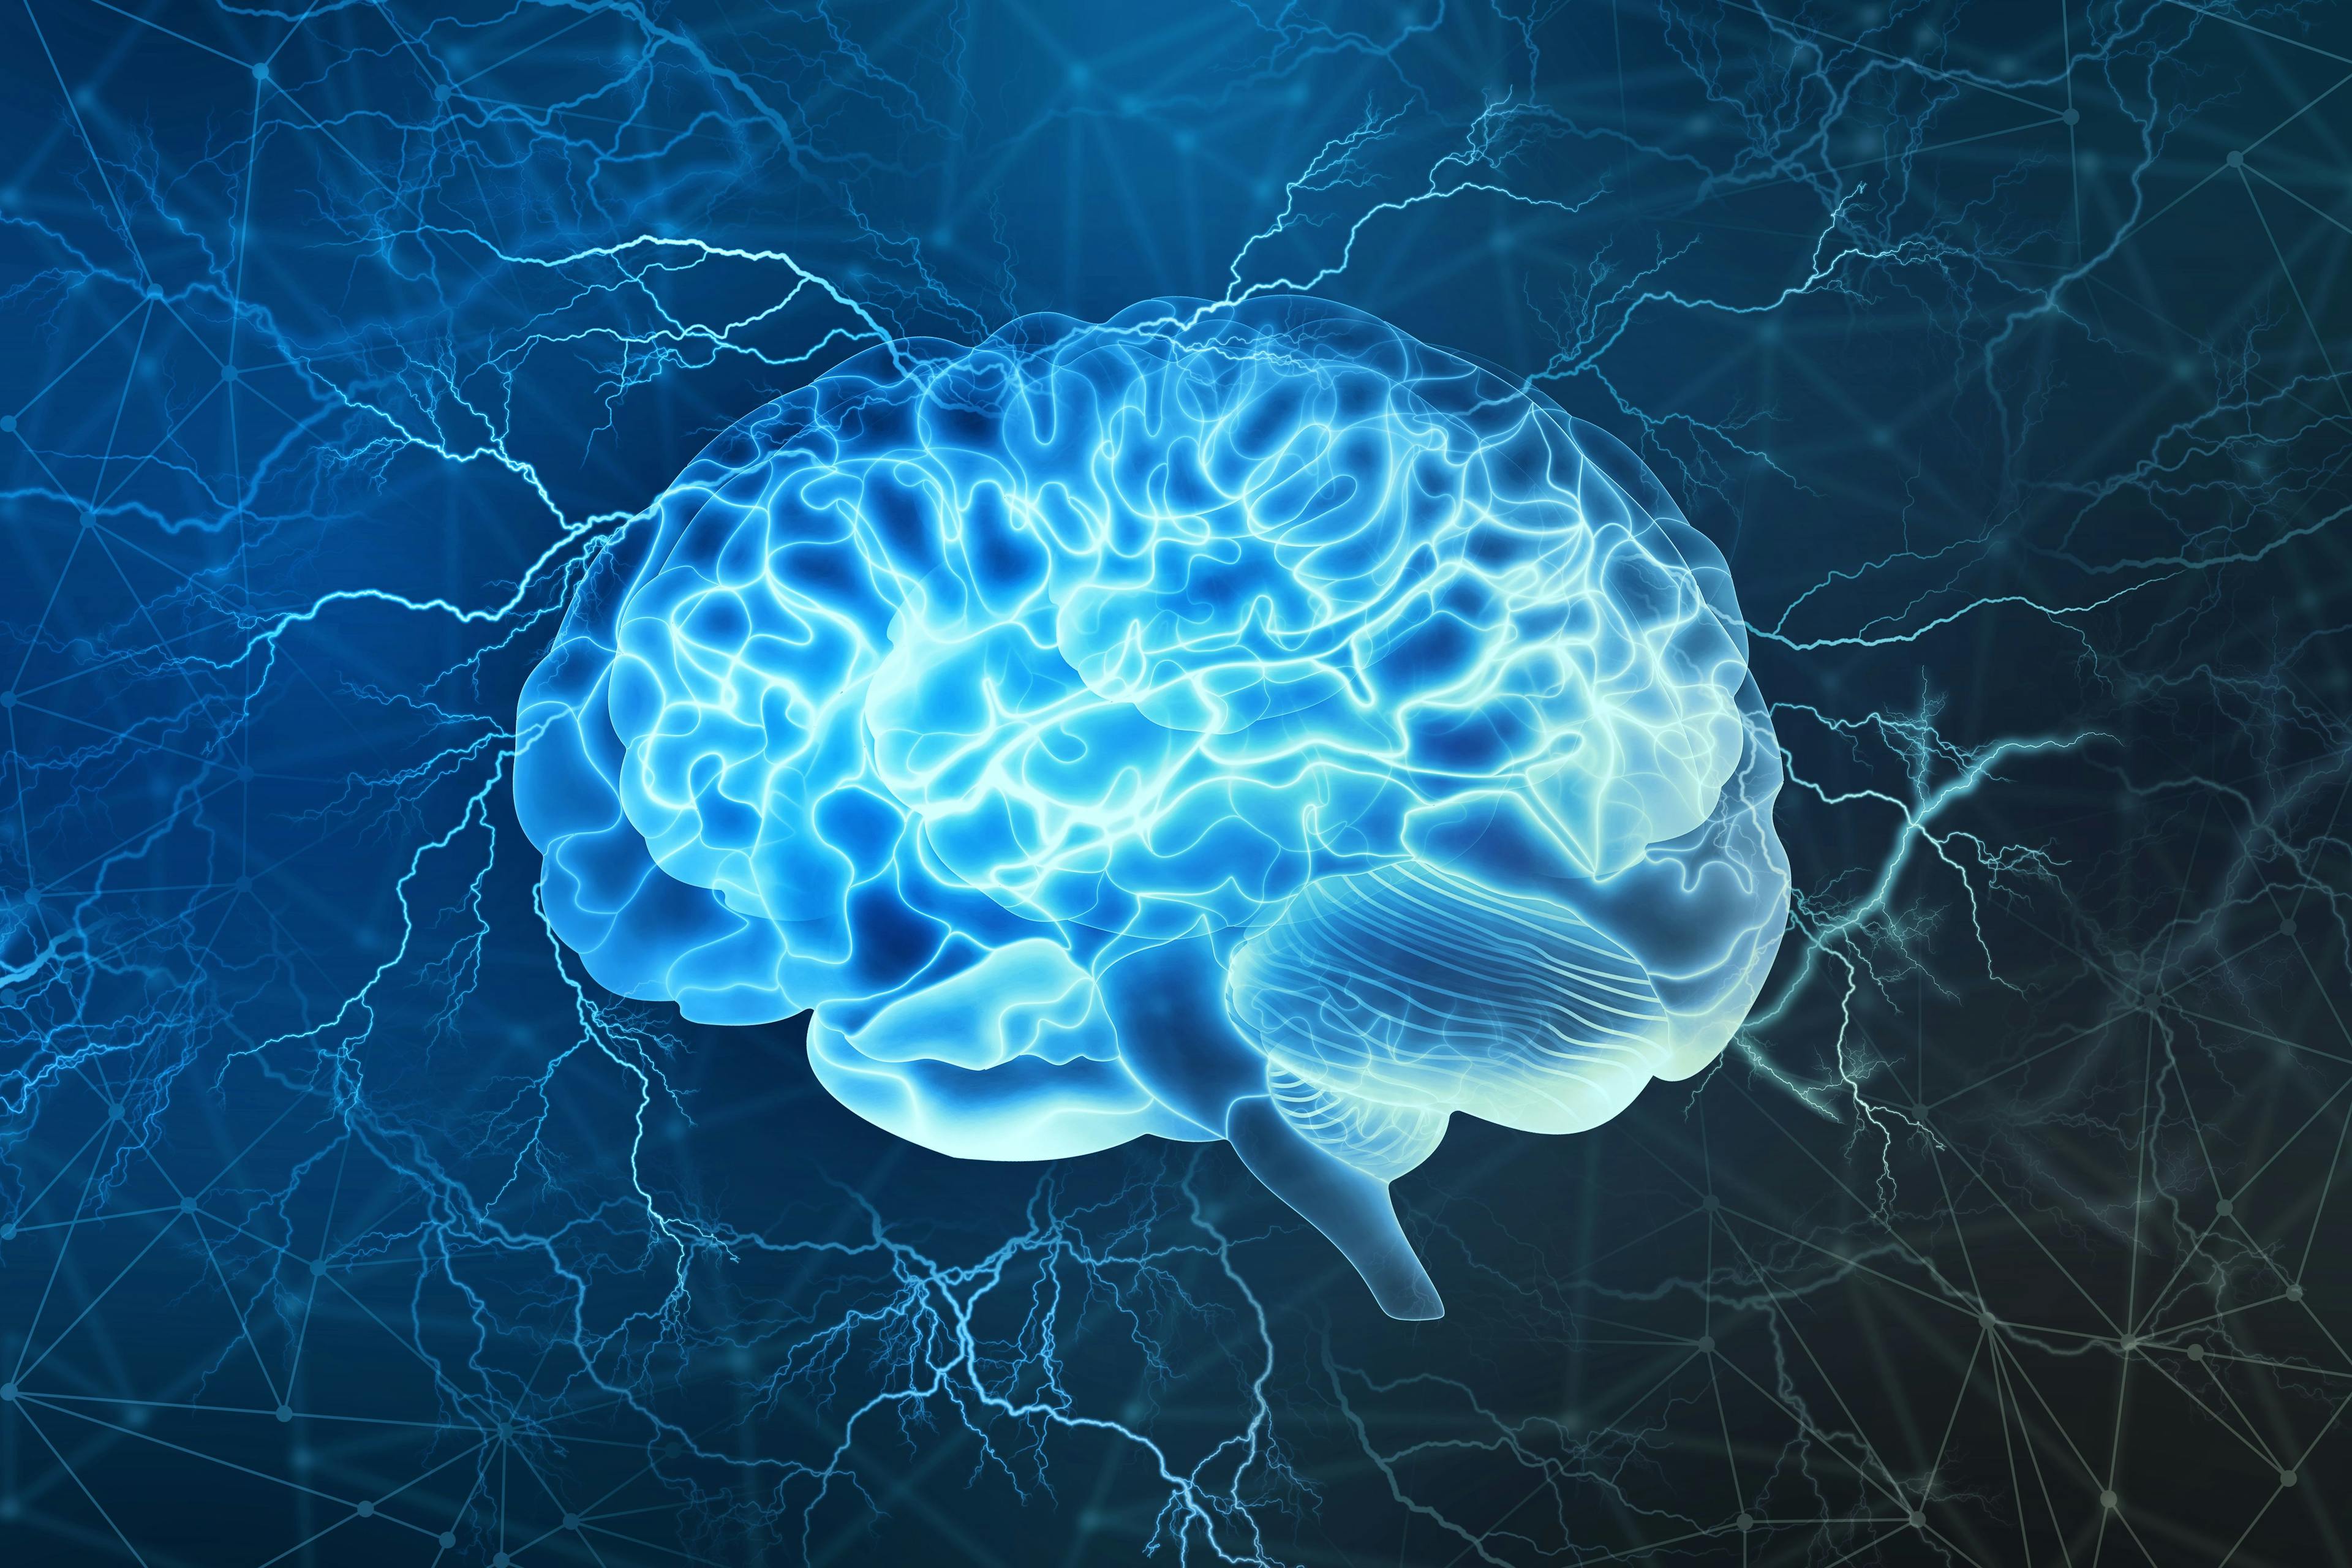 Human brain digital illustration. Electrical activity, flashes and lightning on a blue background. | Image Credit: Siarhei - stock.adobe.com